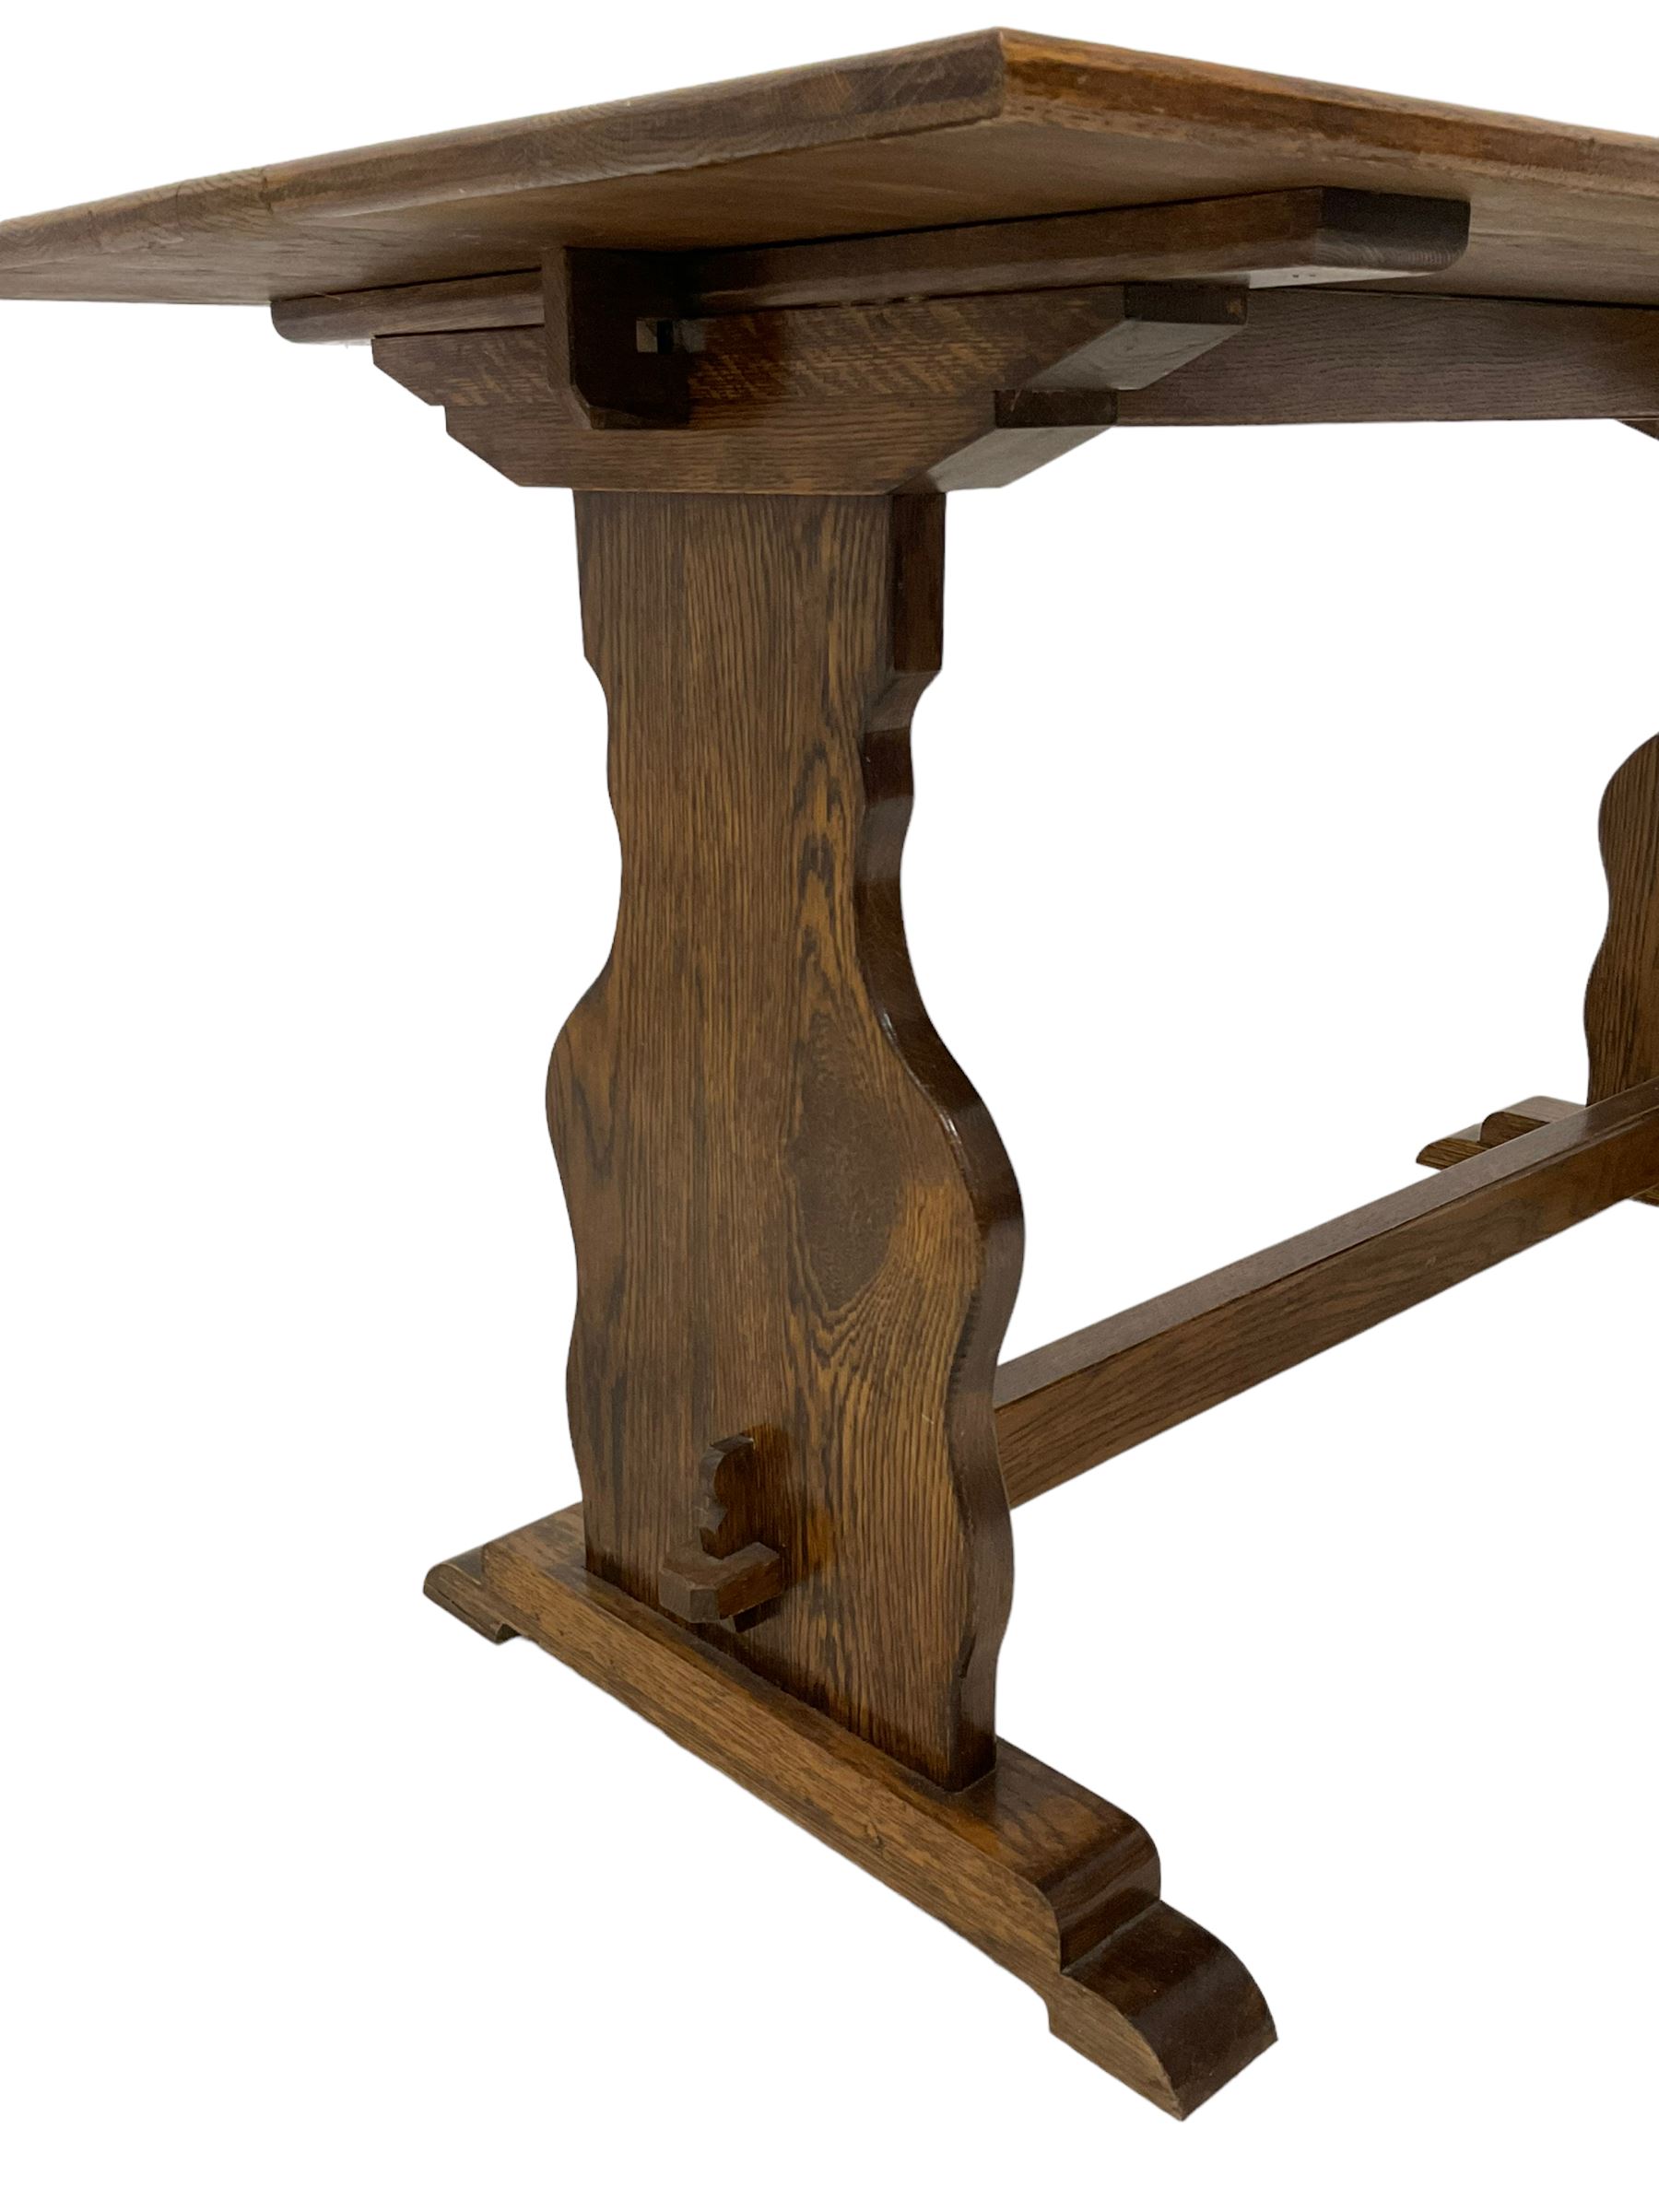 Late 20th century oak dining table - Image 3 of 3